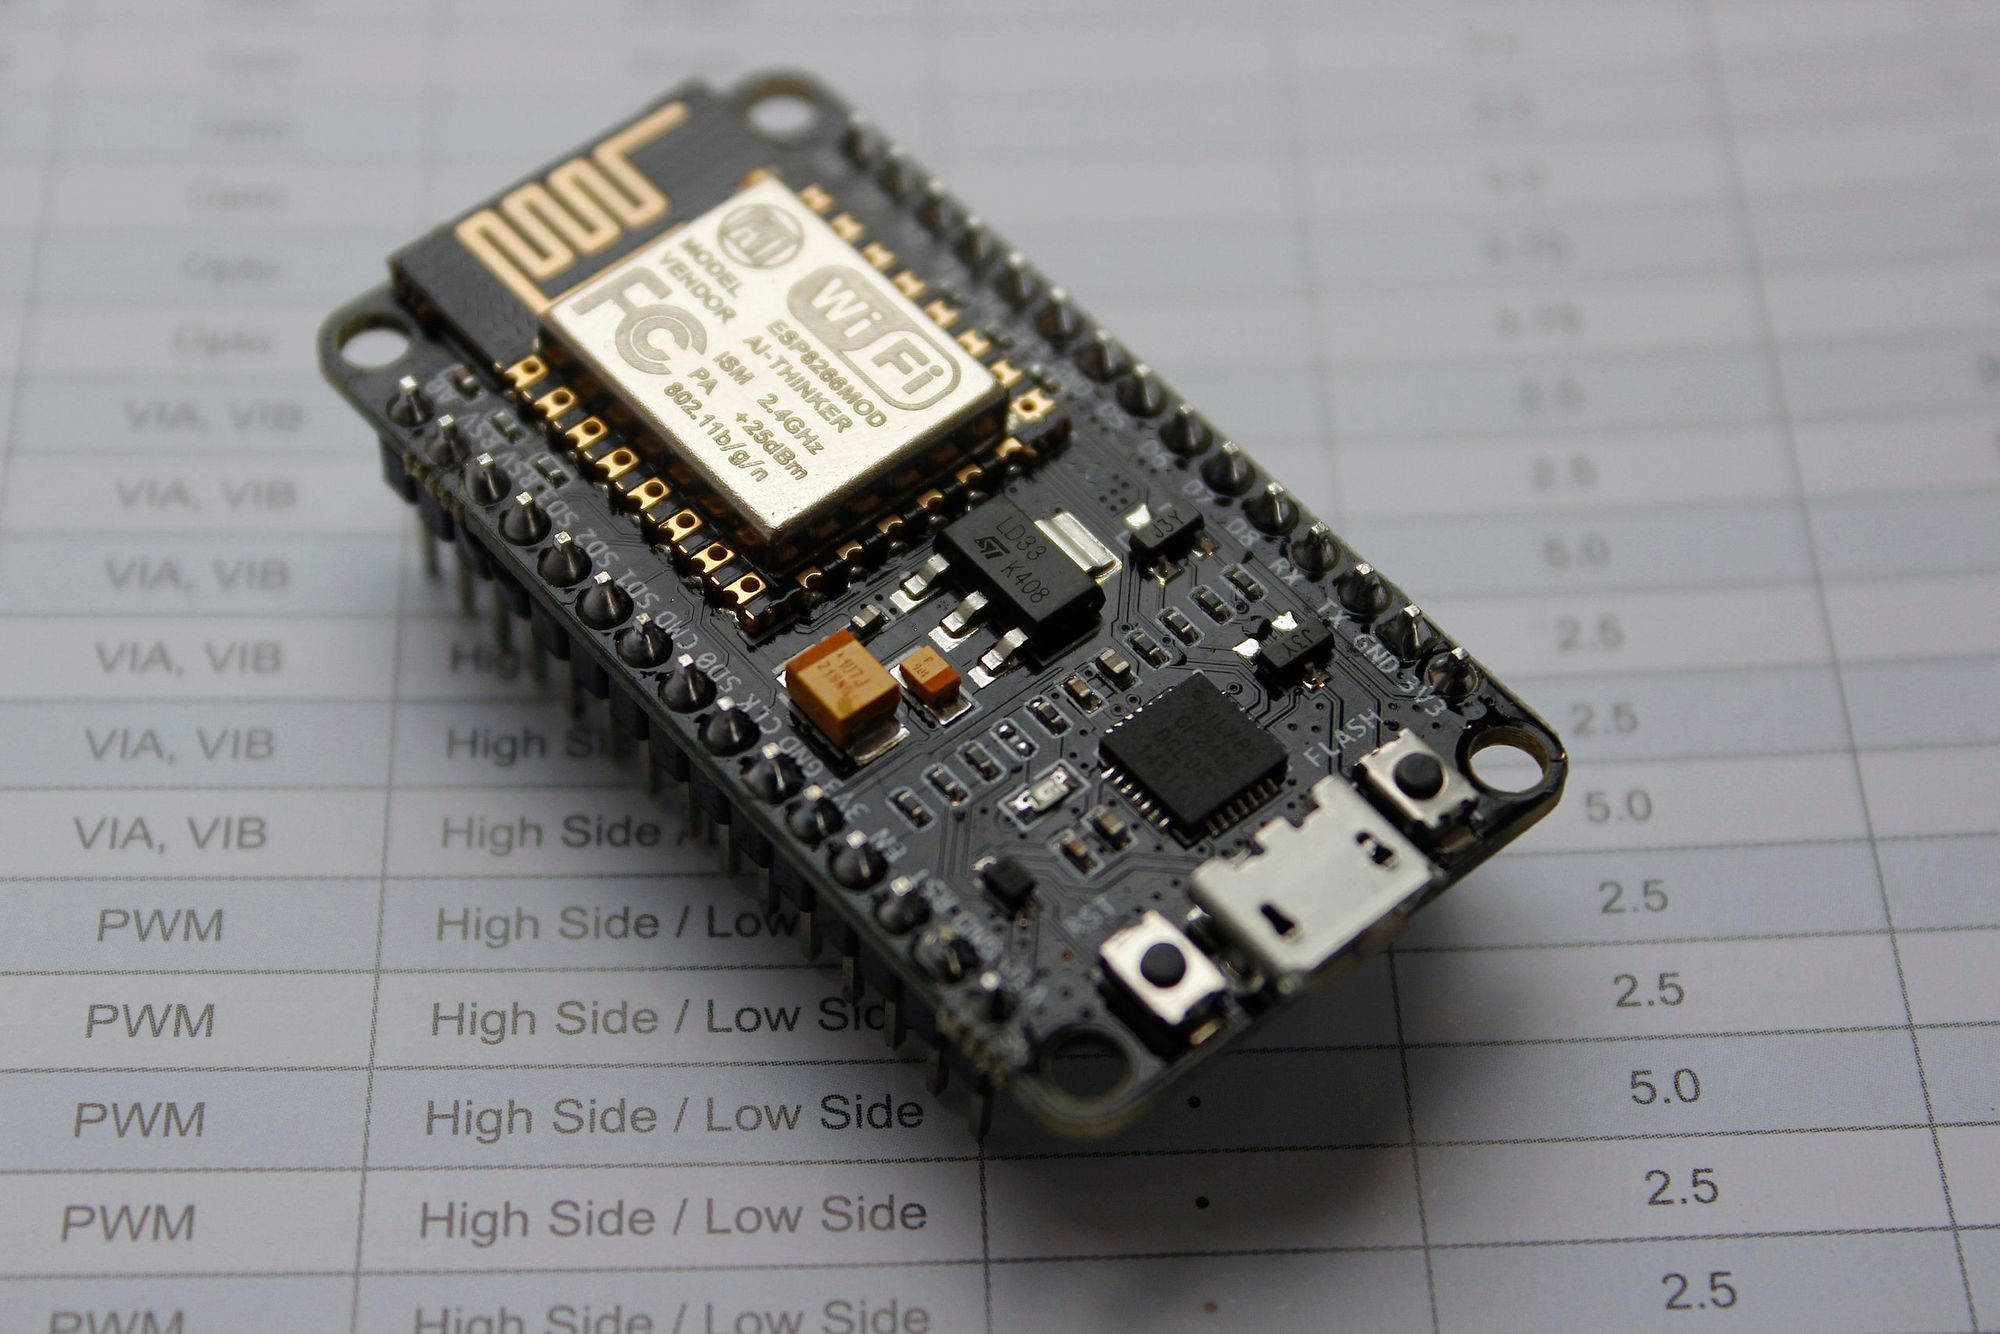 NodeMCU - By Vowstar - Own work, CC BY-SA 4.0